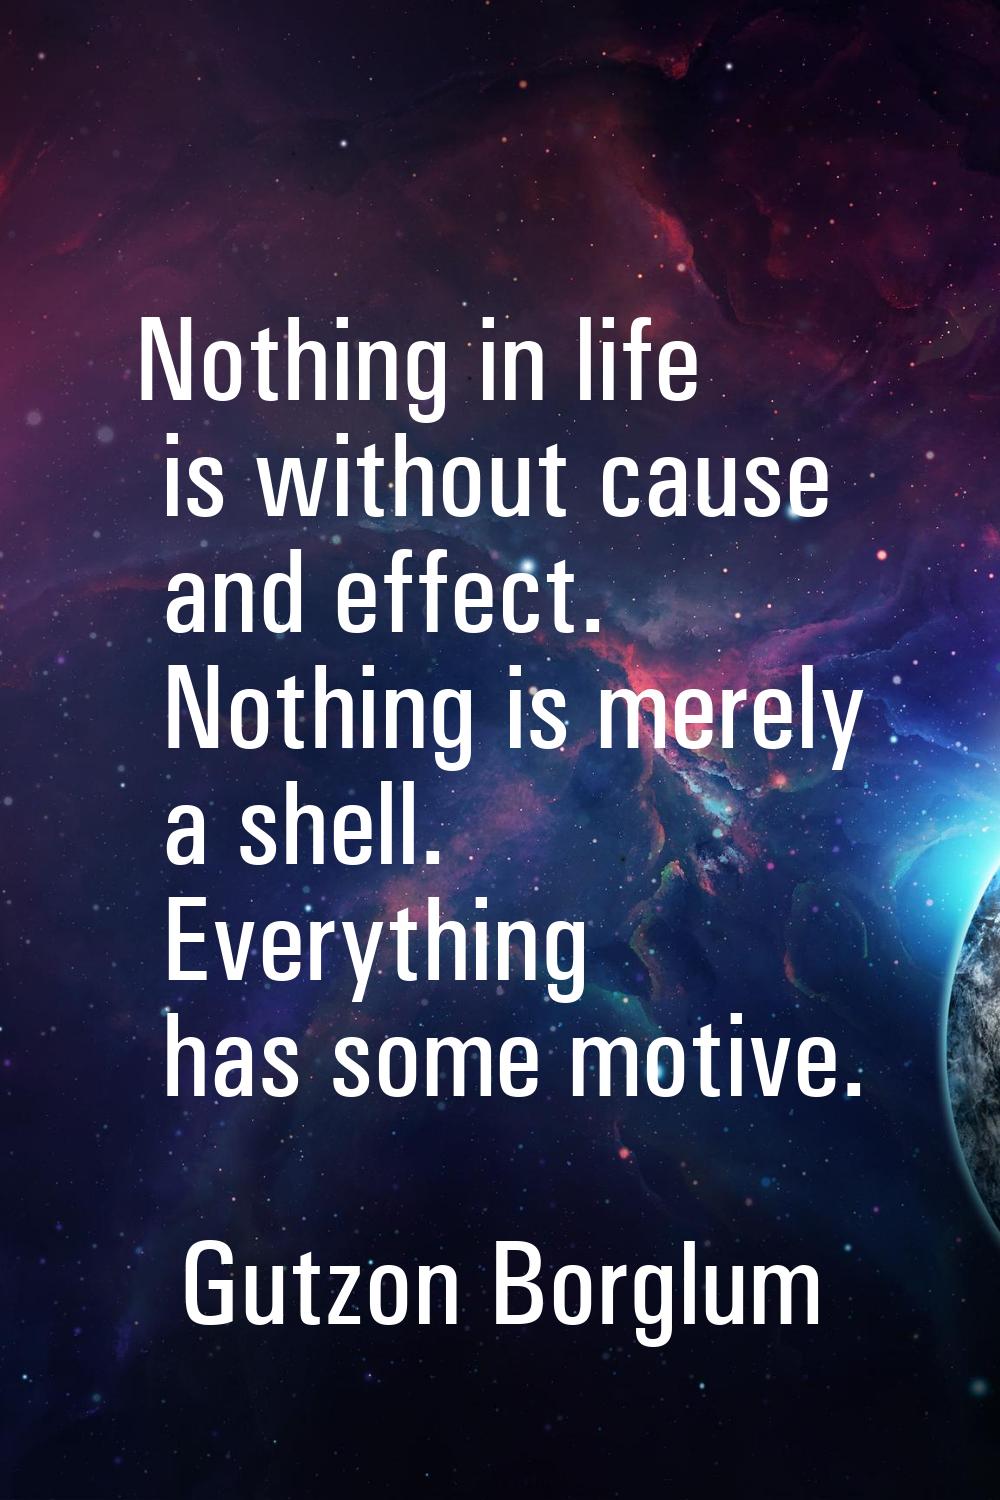 Nothing in life is without cause and effect. Nothing is merely a shell. Everything has some motive.